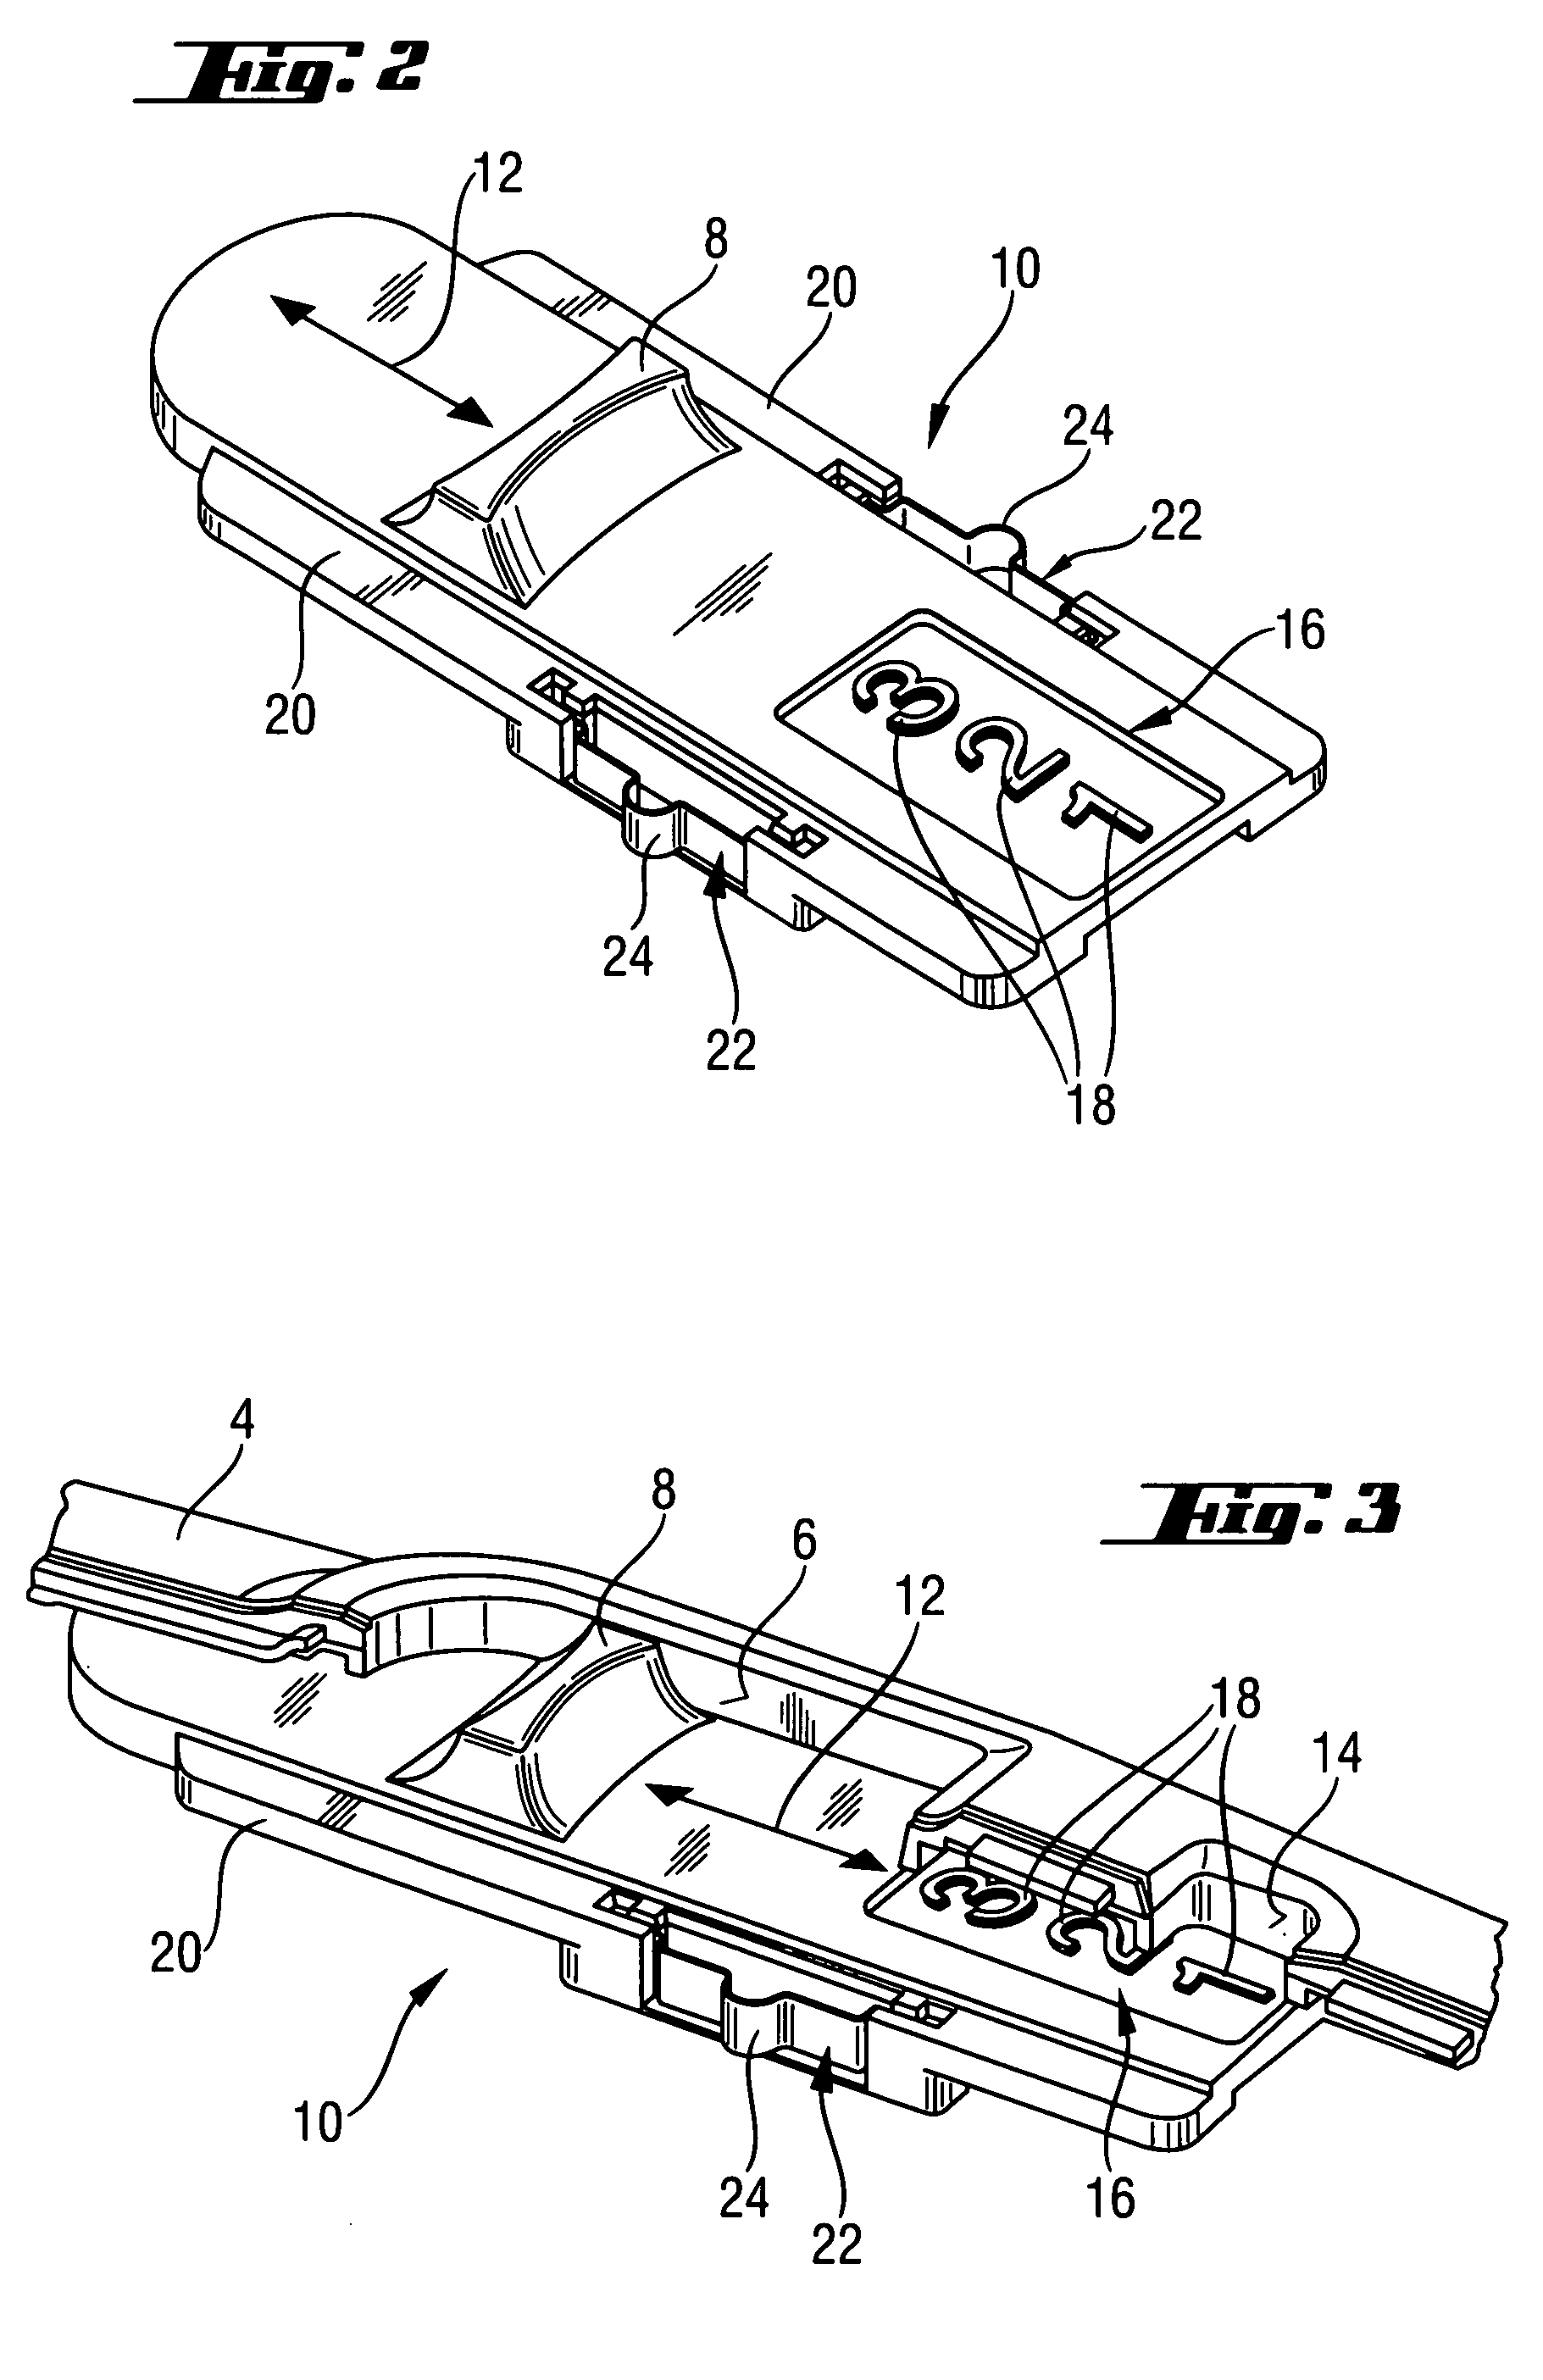 Motor-driven hand-held tool with functional step display